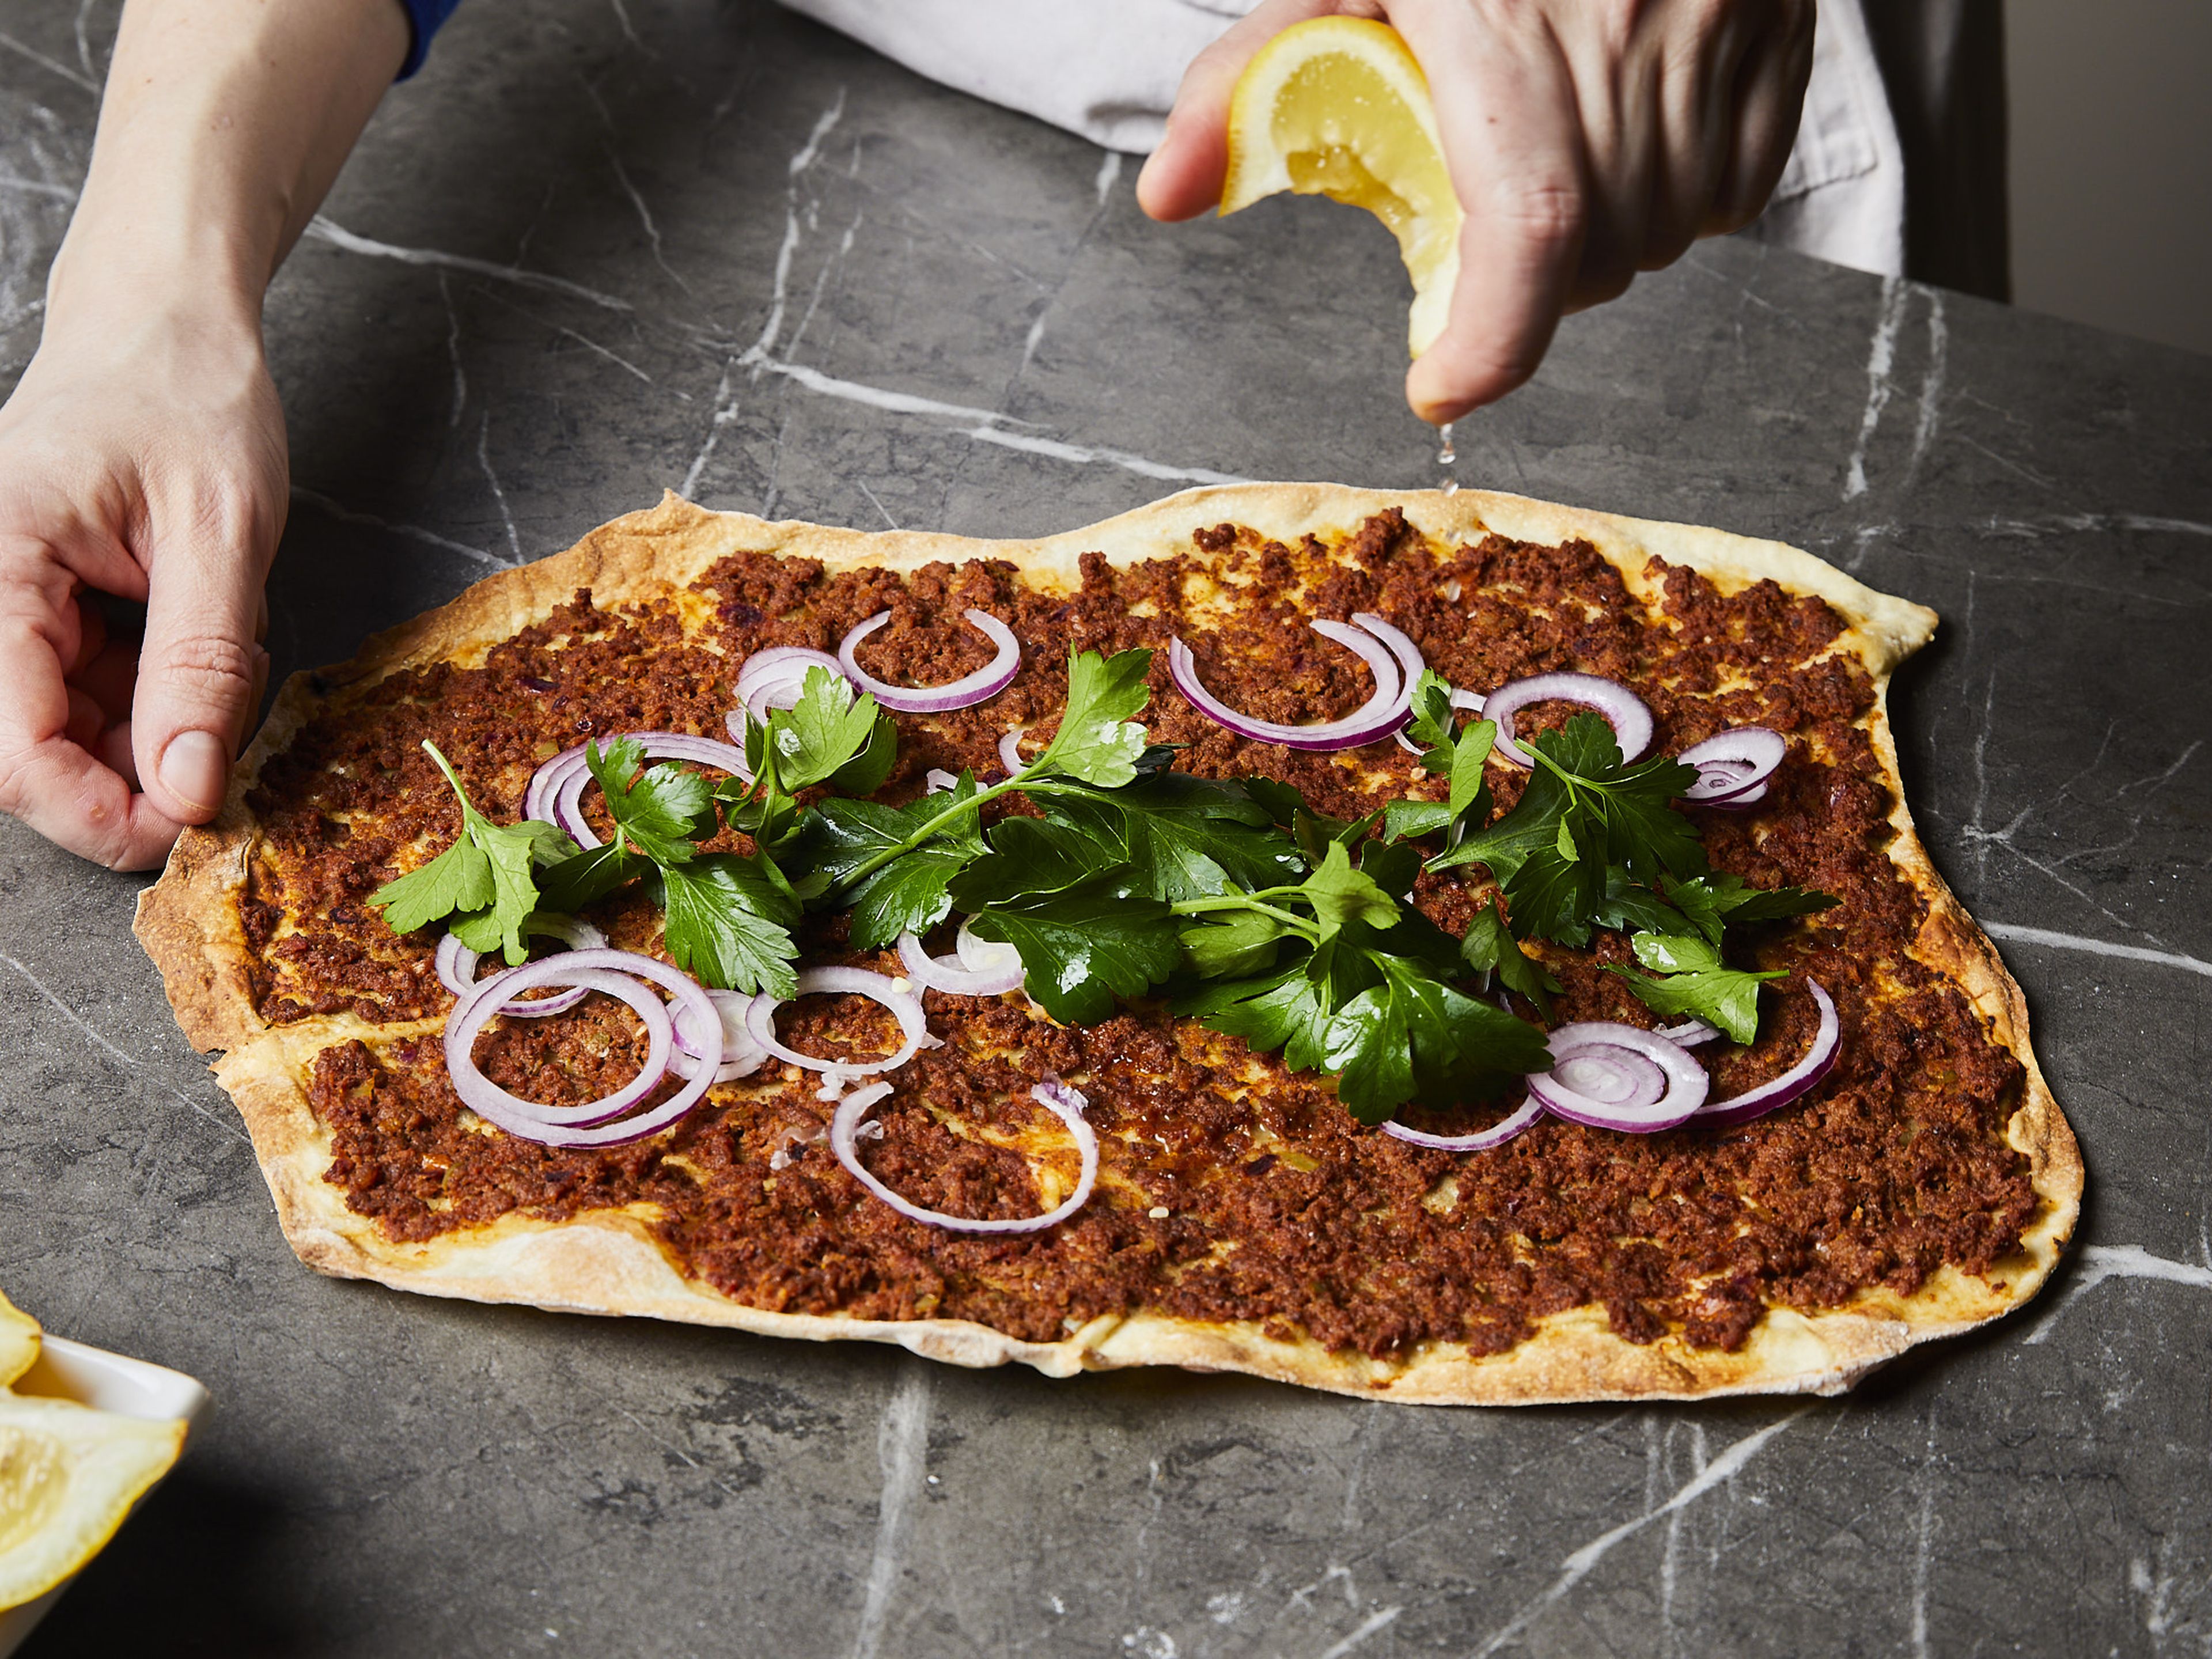 While the lahmacun is baking, pluck the parsley leaves and chop them roughly. Finely slice the remaining red onions. Cut the lemon into wedges. Remove the lahmacun from the oven and drizzle with a little lemon juice. Serve with the parsley and onions.